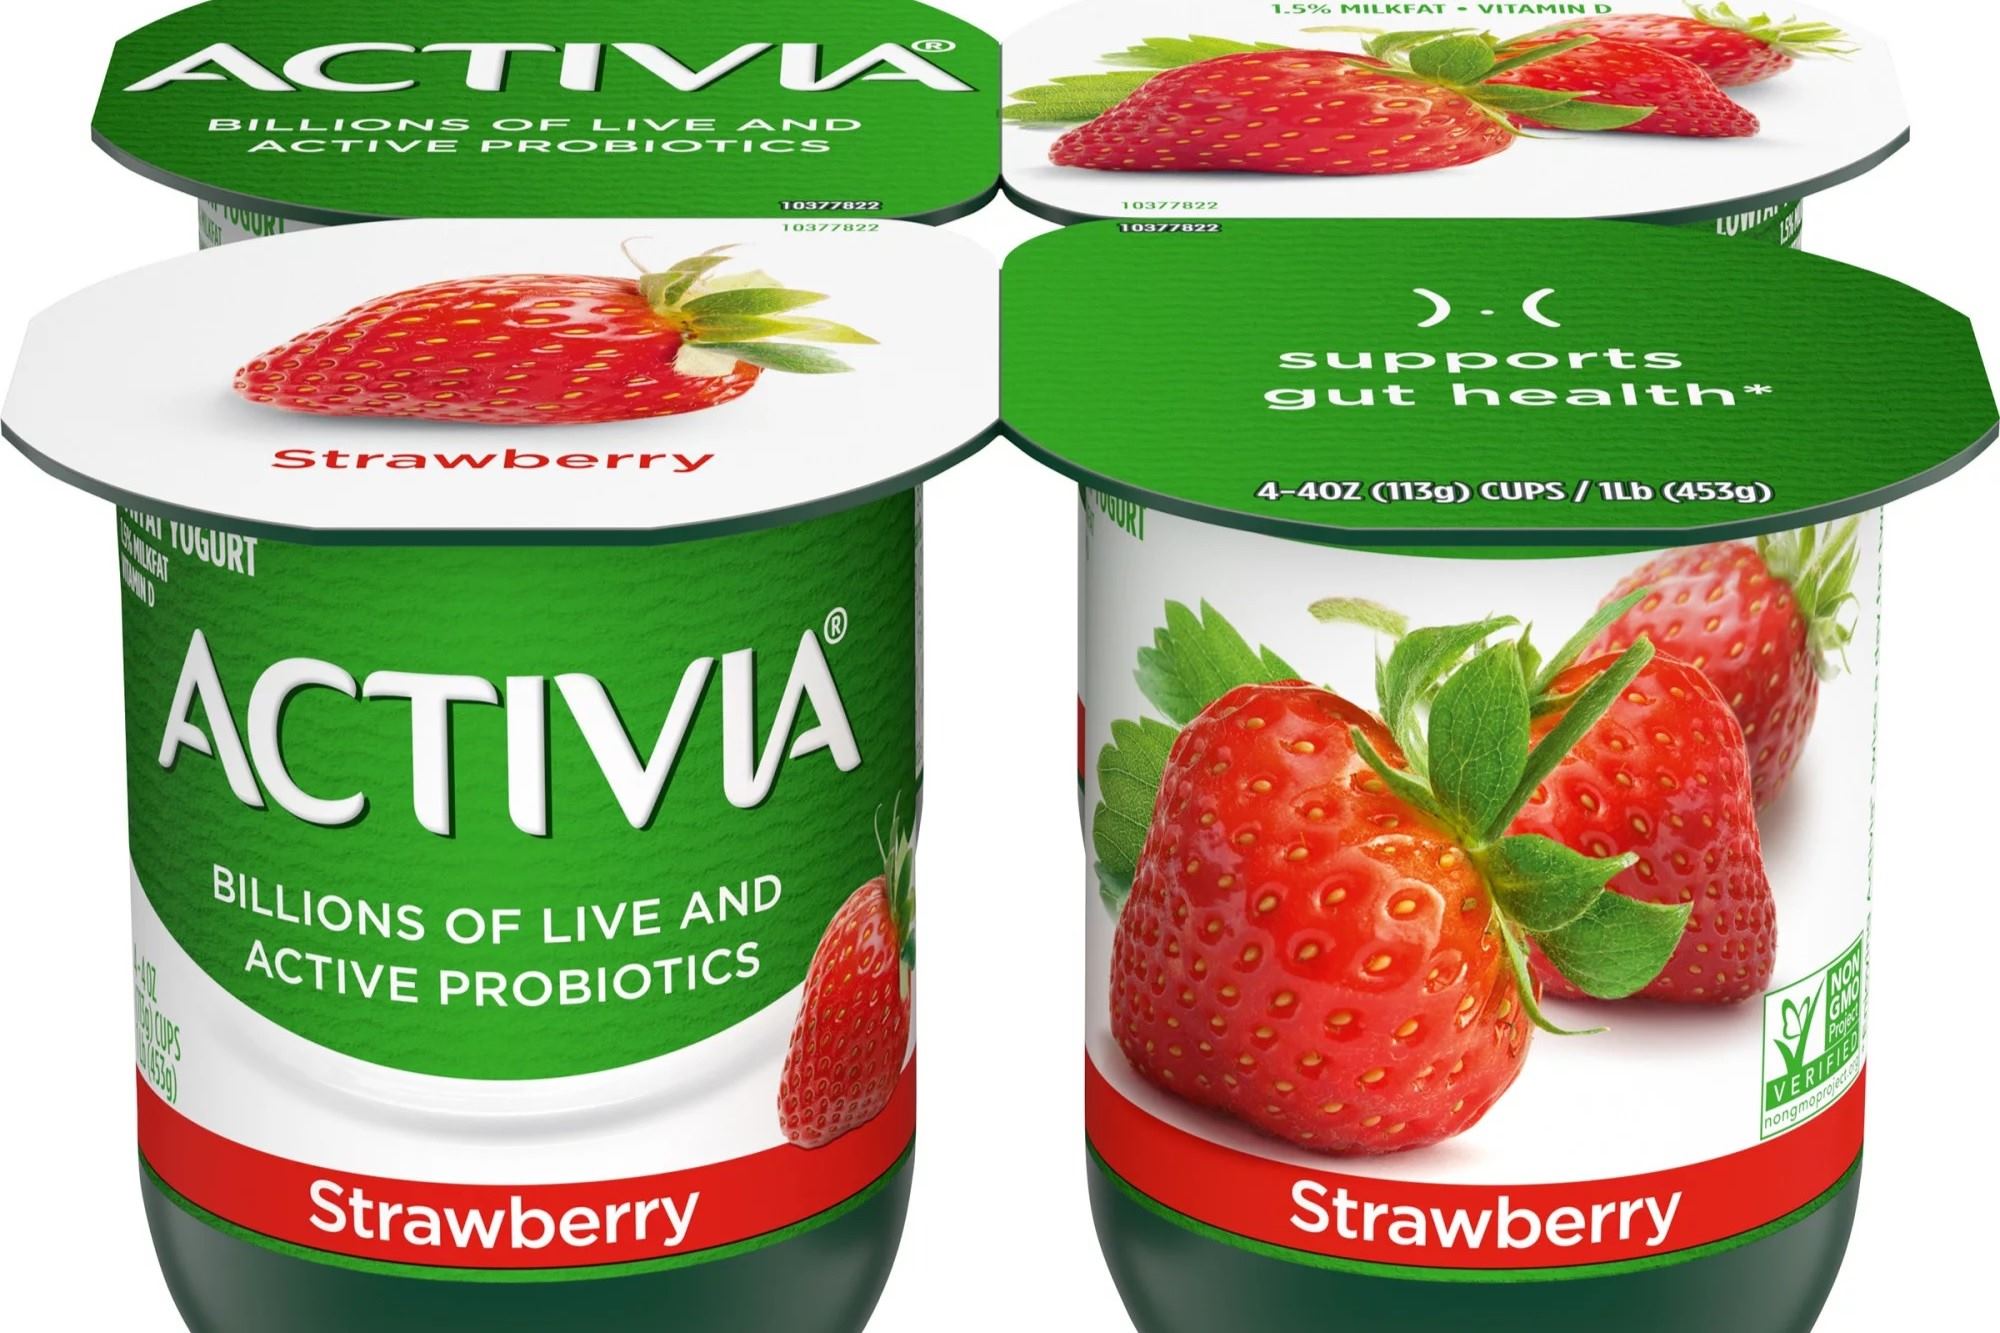 19-activia-strawberry-nutrition-facts